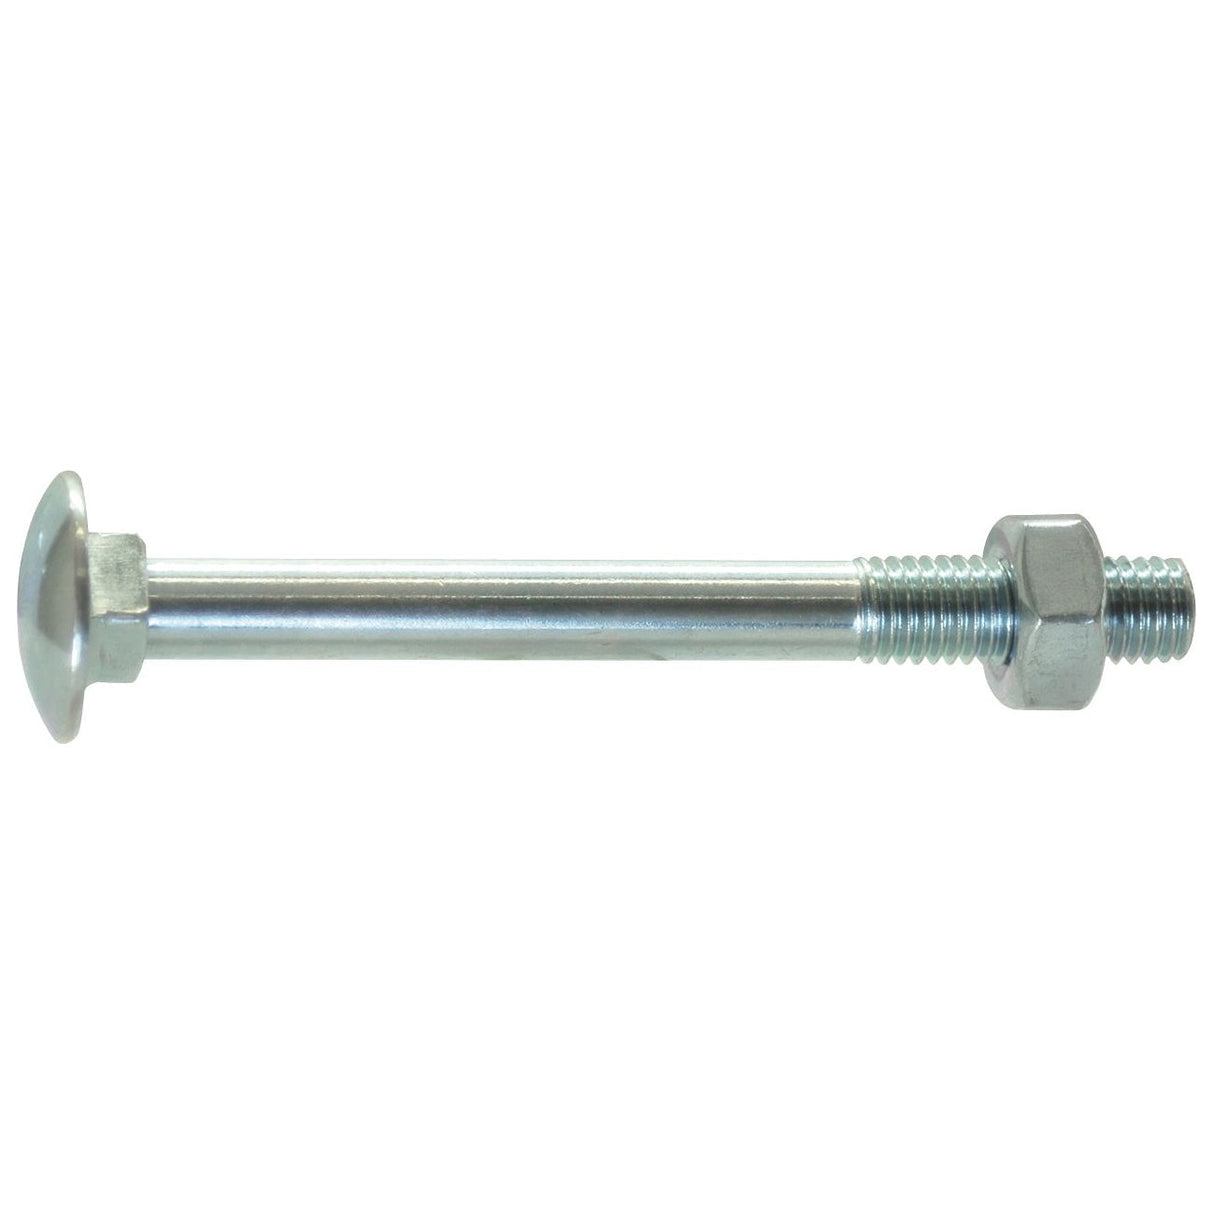 Metric Carriage Bolt and Nut, Size: M8 x 30mm (Din 603/555)
 - S.6899 - Farming Parts